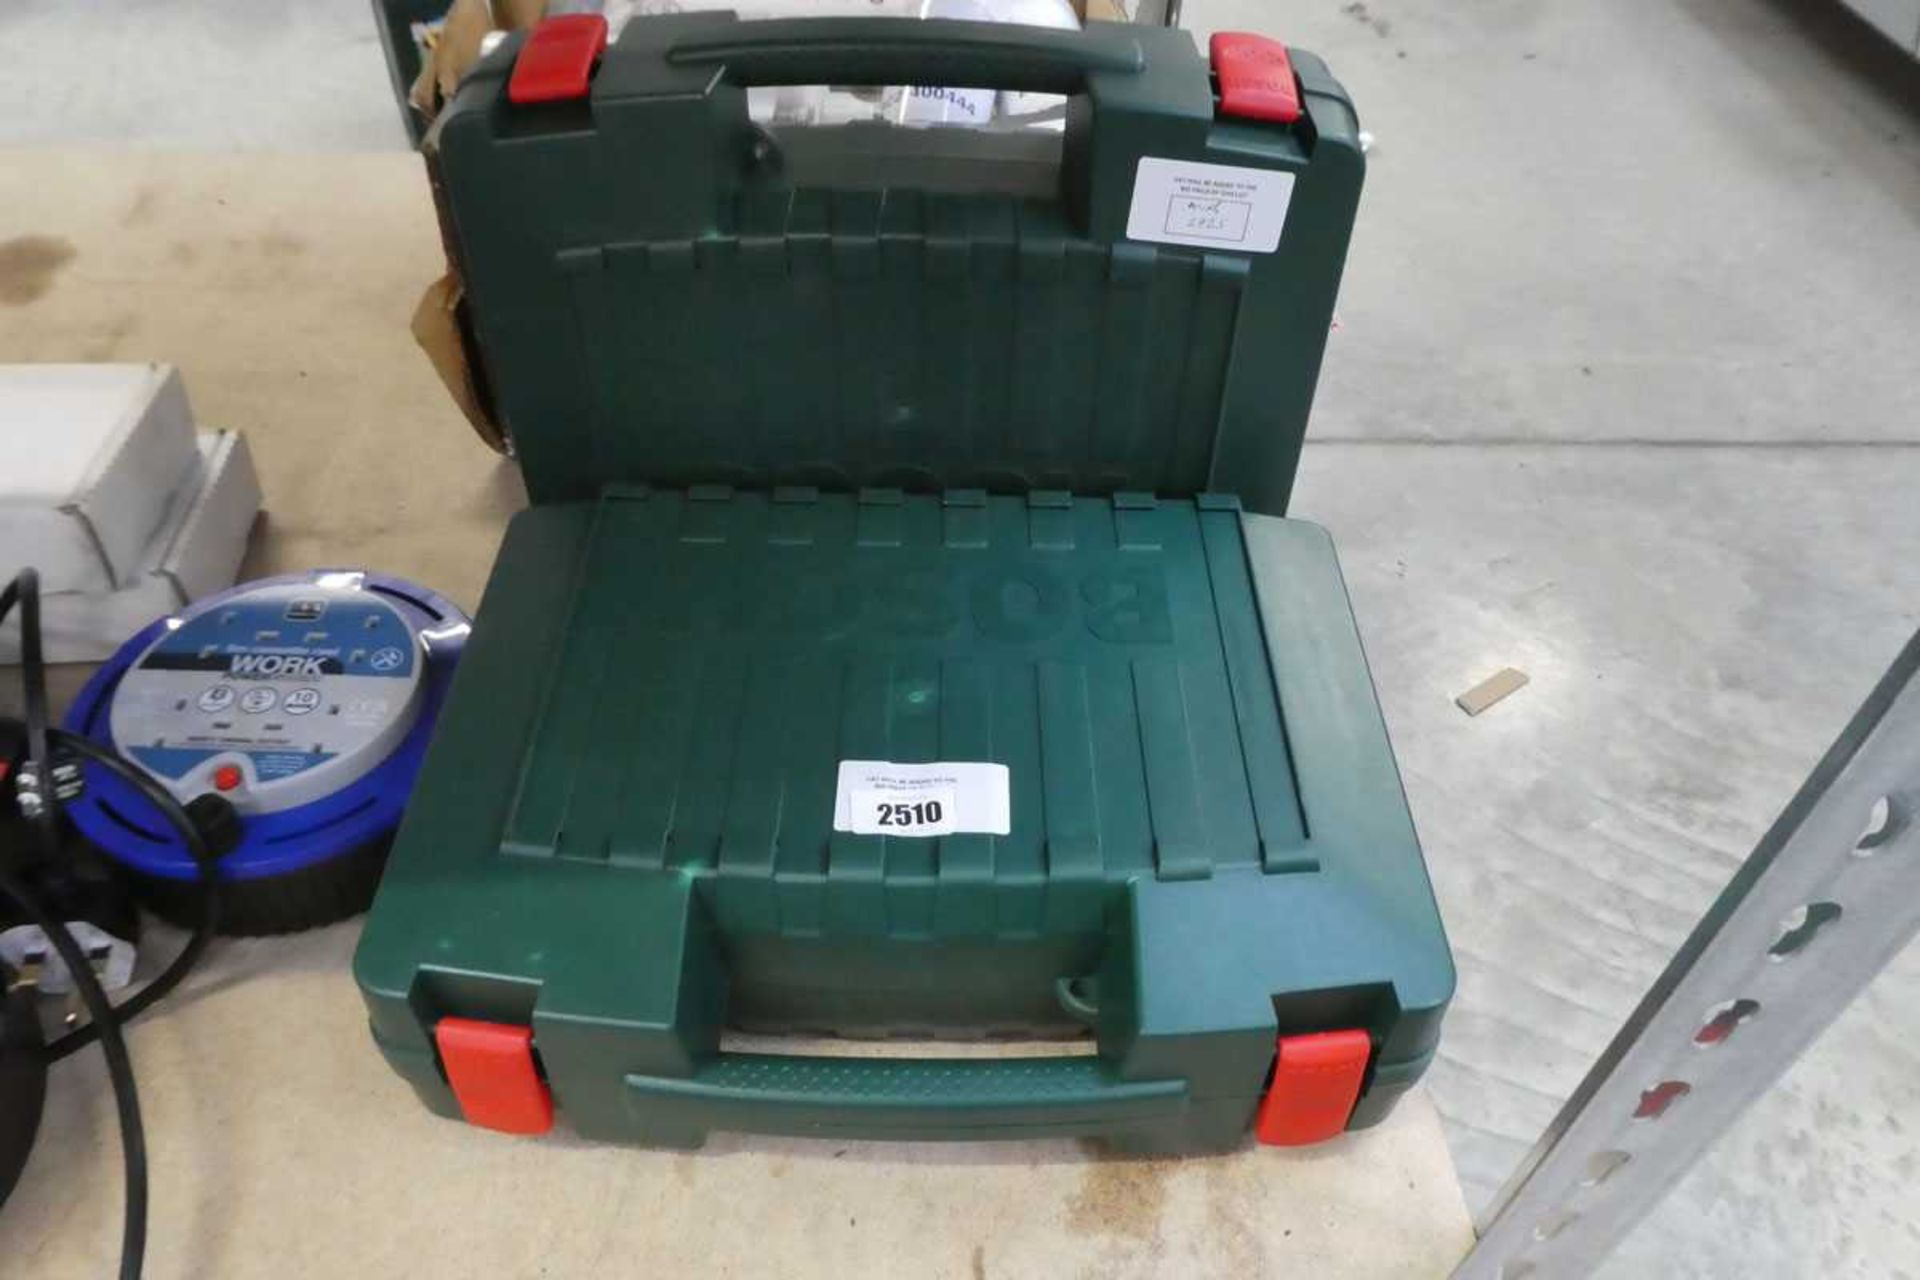 +VAT Empty Bosch drill case with empty Siwuxe case